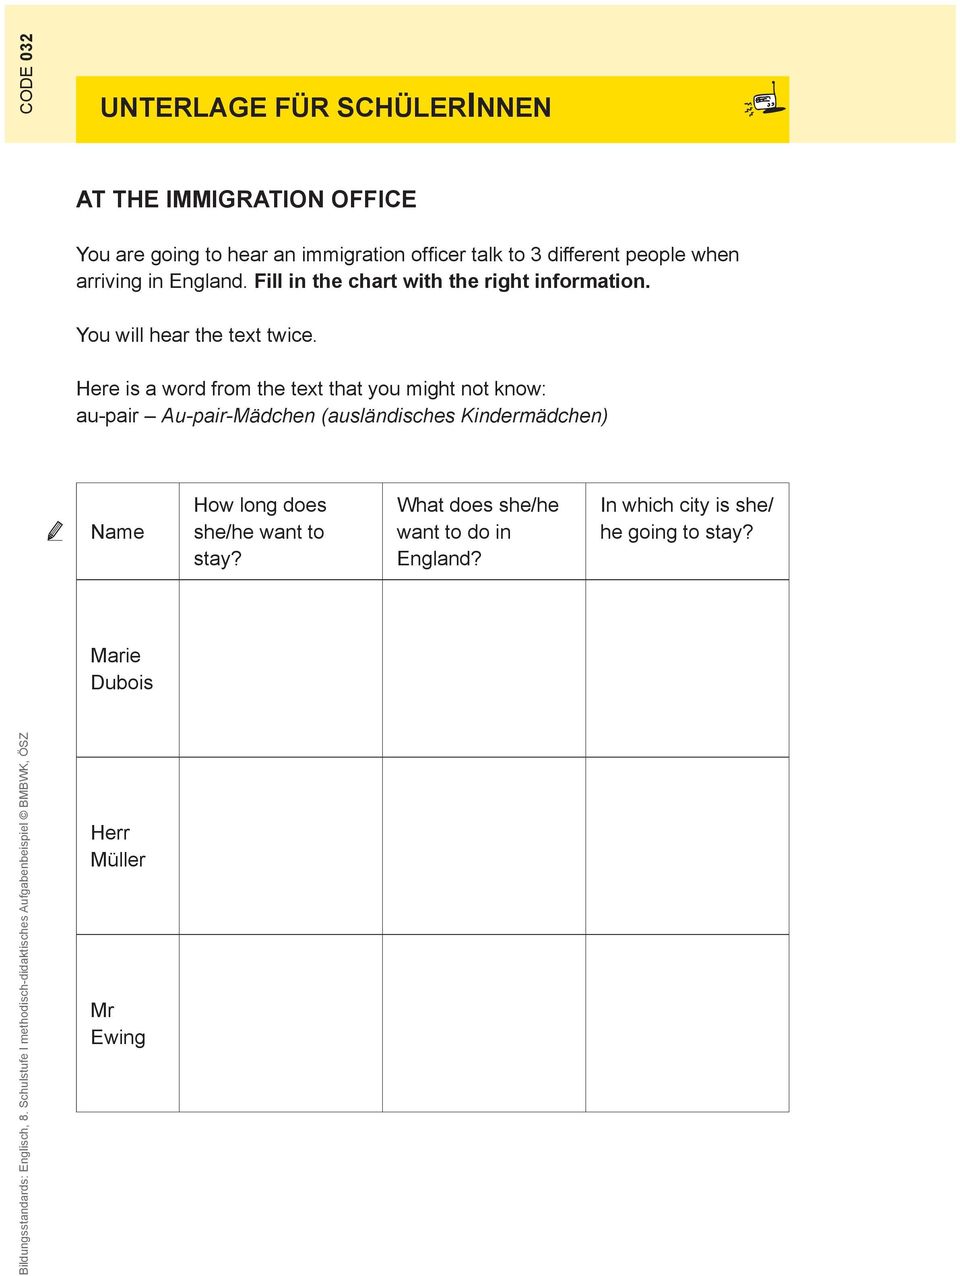 an immigration officer talk to 3 different people when arriving in England. Fill in the chart with the right information.